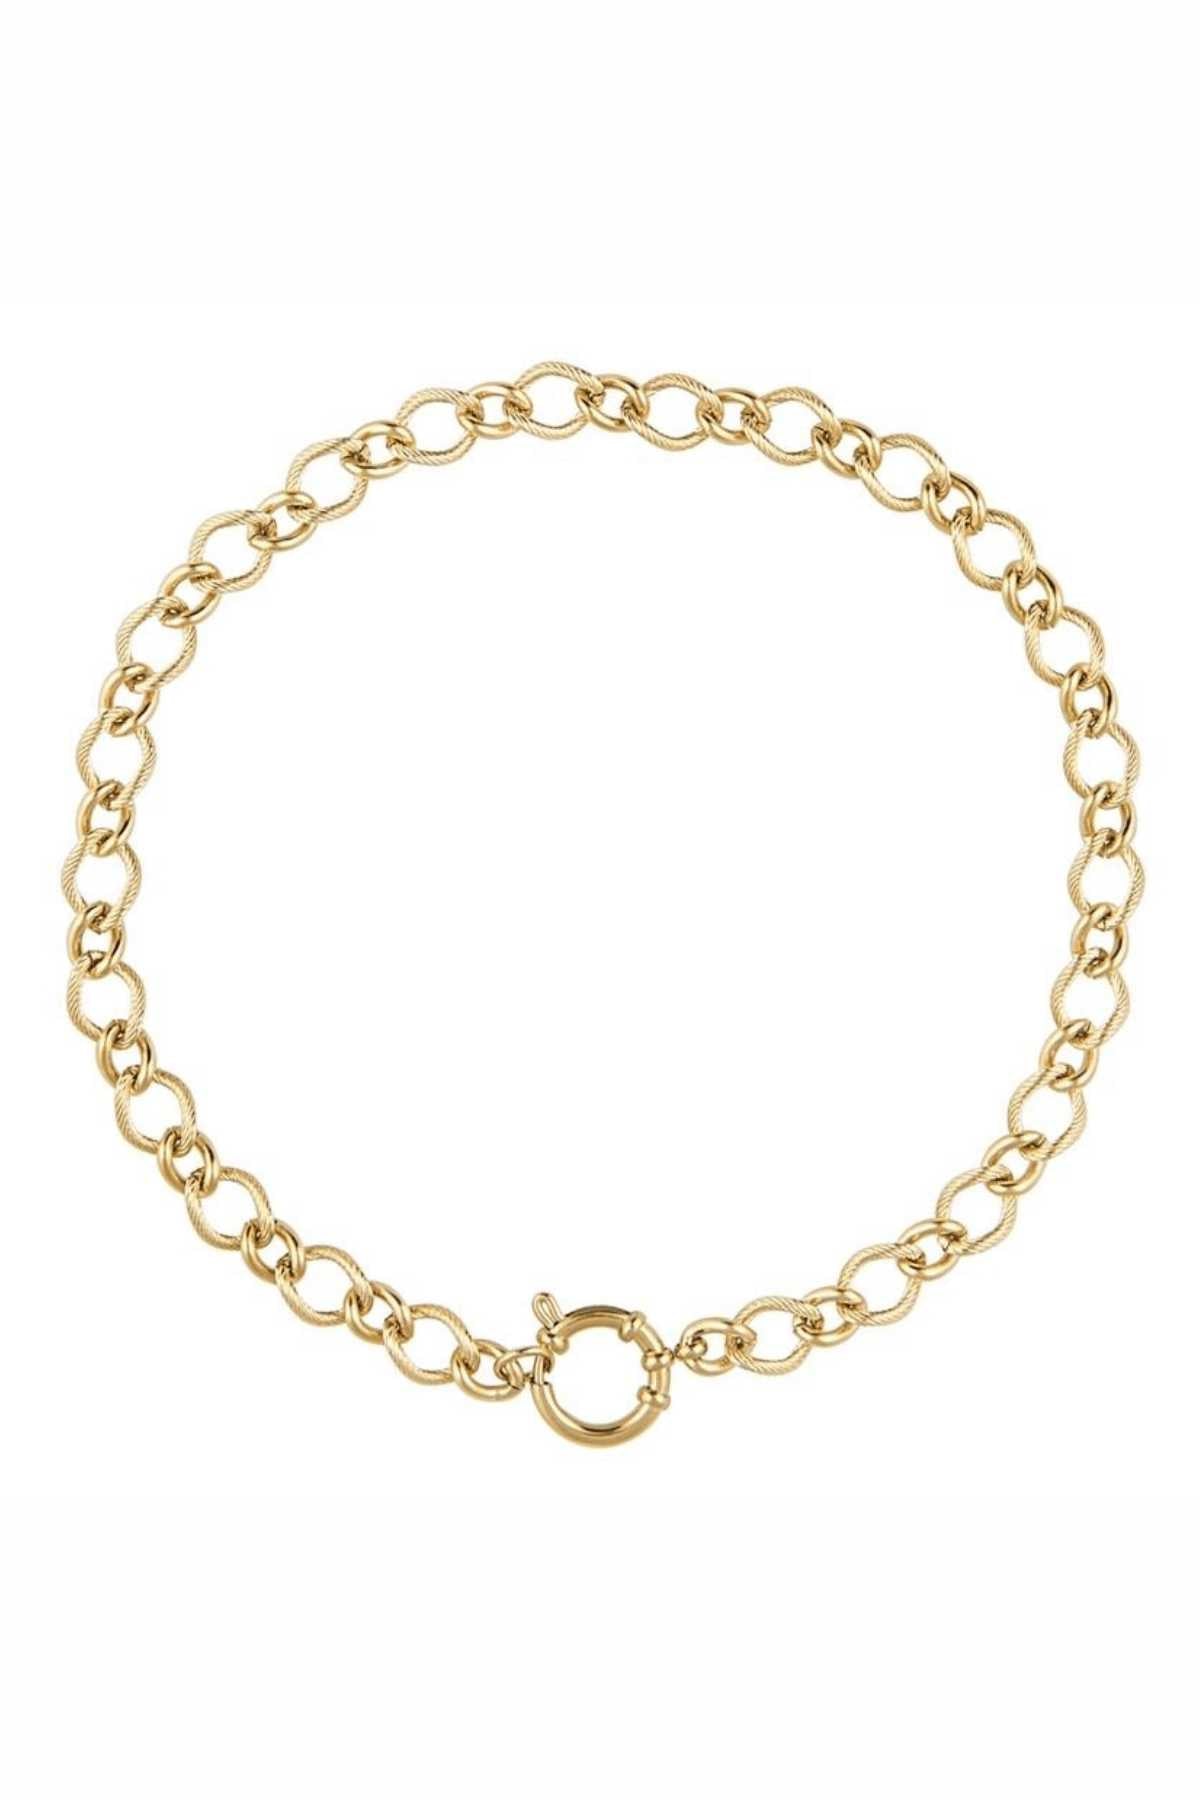 Sienna Gold Link Chain Necklace - FINAL SALE - JO+CO